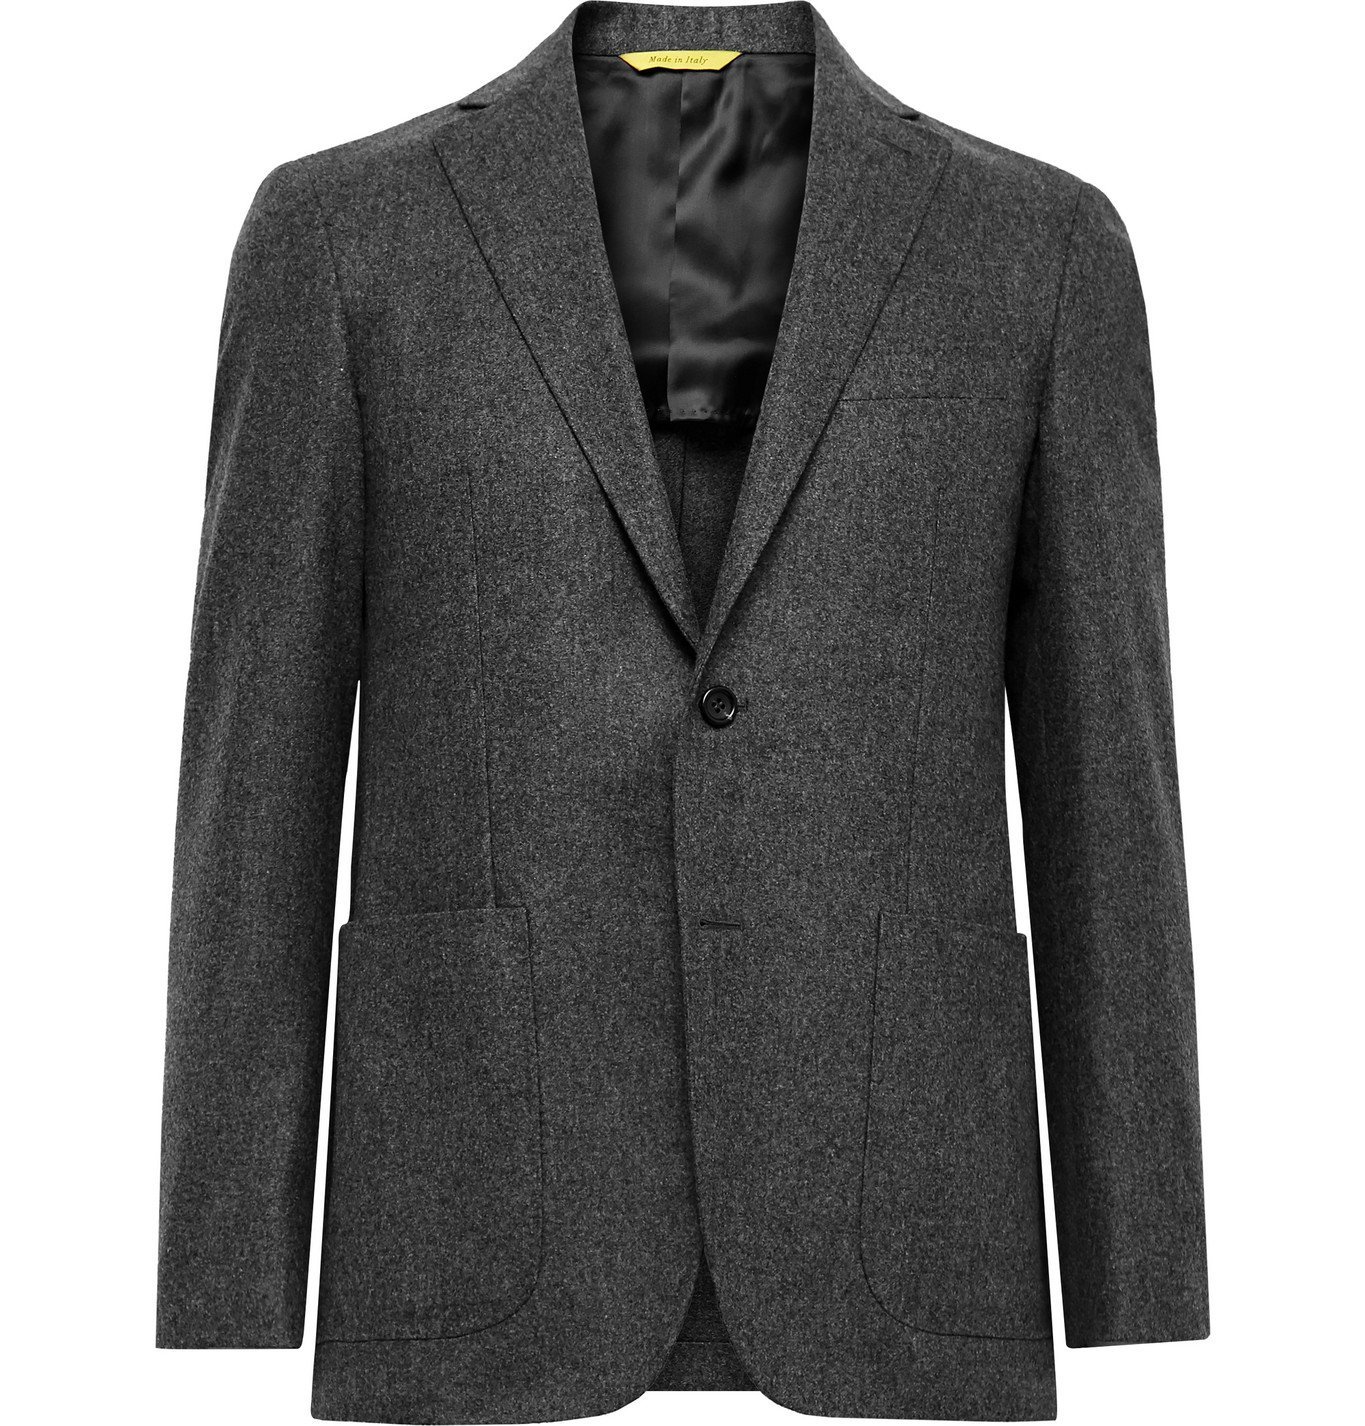 Canali - Kei Slim-Fit Unstructured Wool-Flannel Suit Jacket - Gray Canali